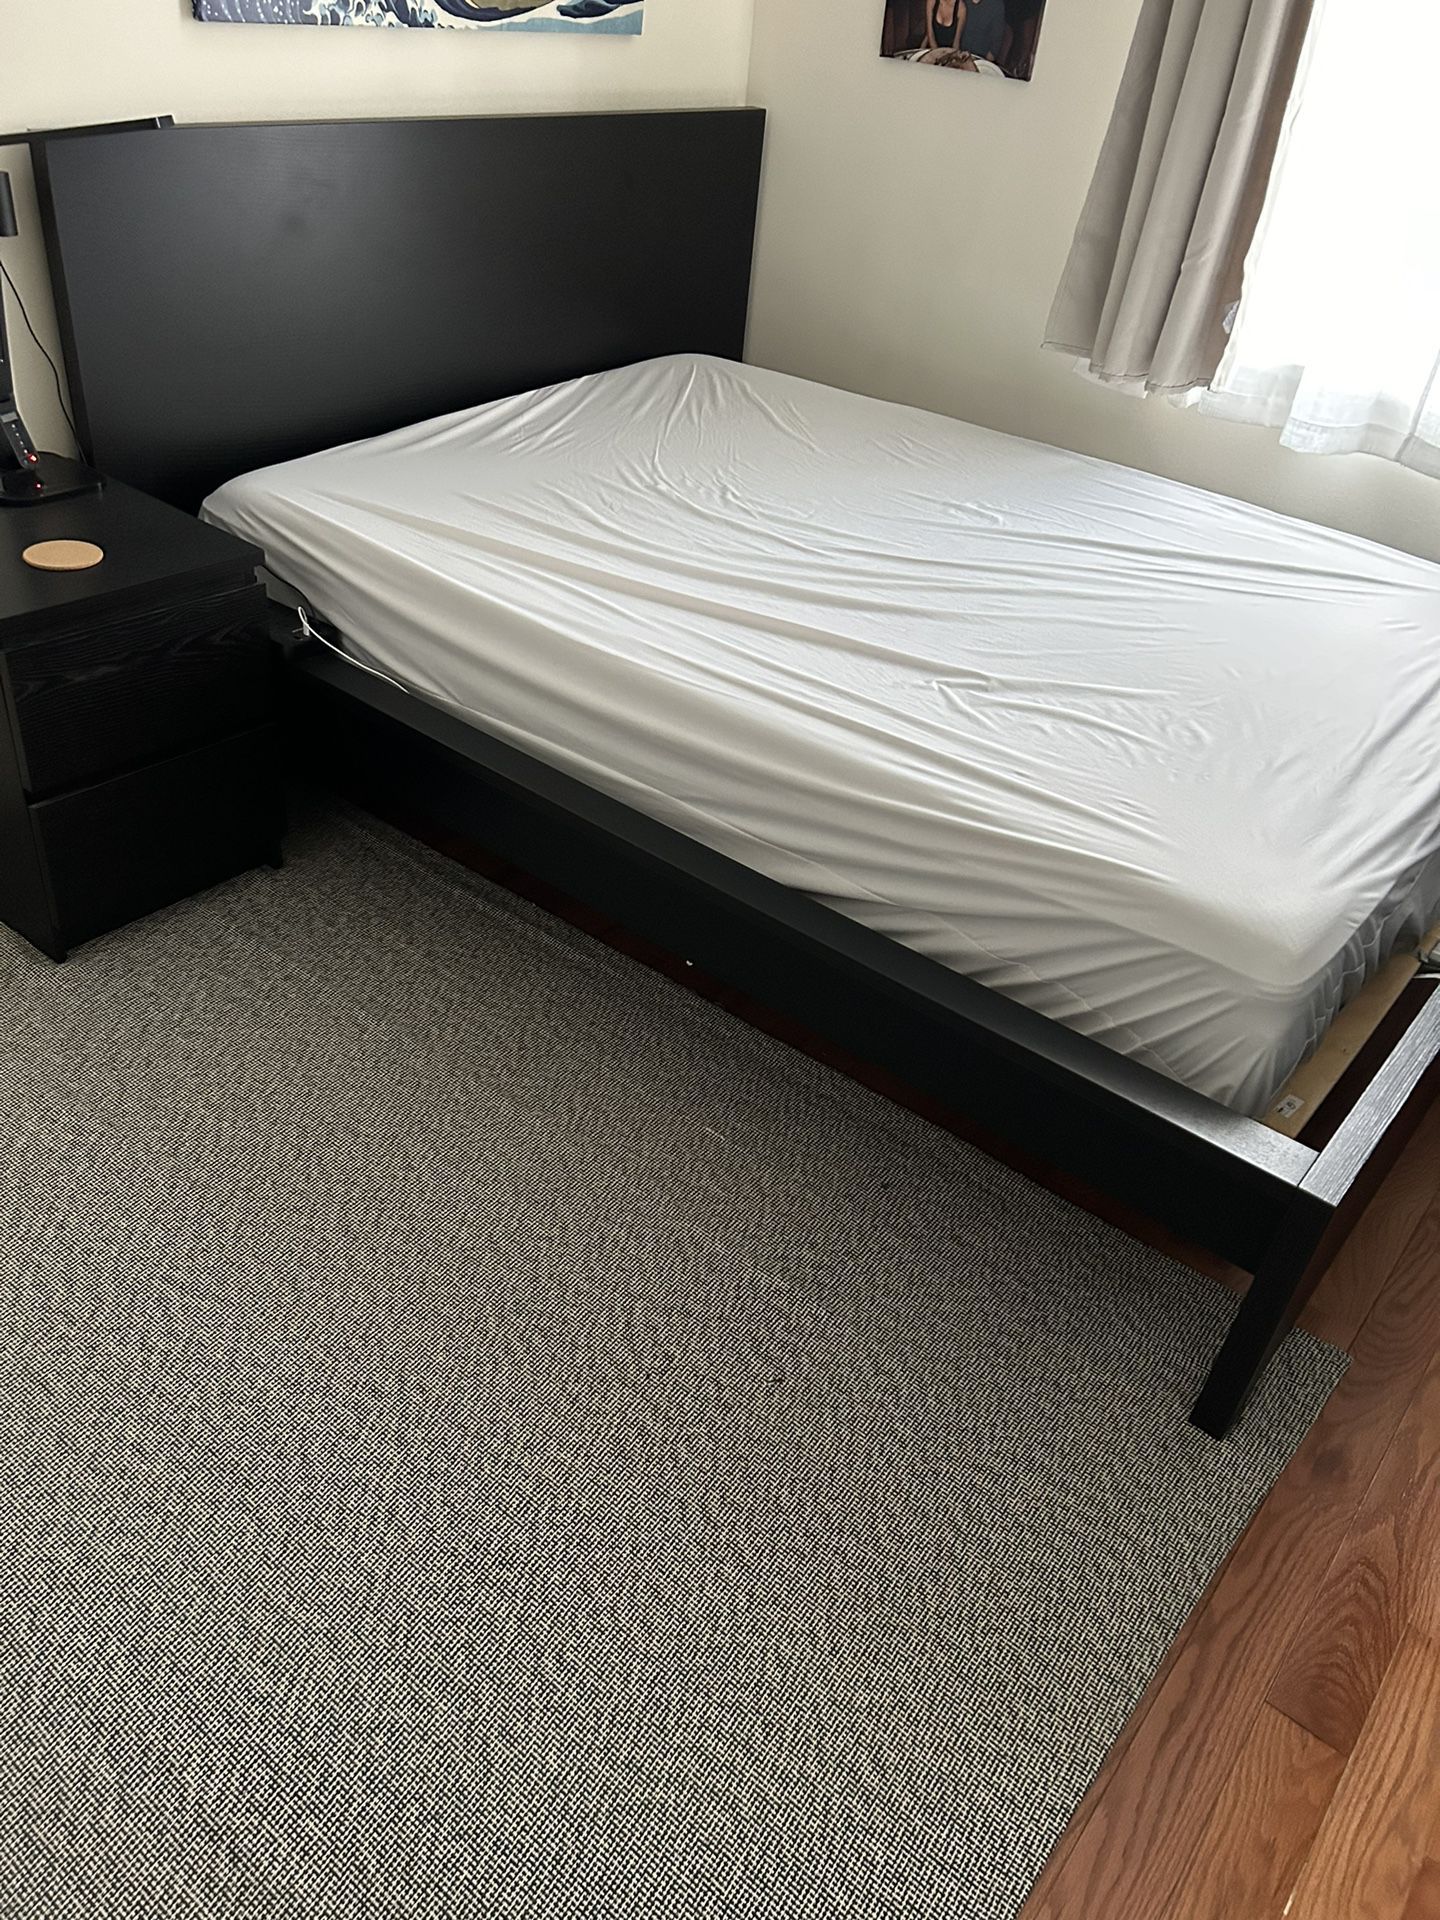 Black IKEA Queen Malm Bed Frame